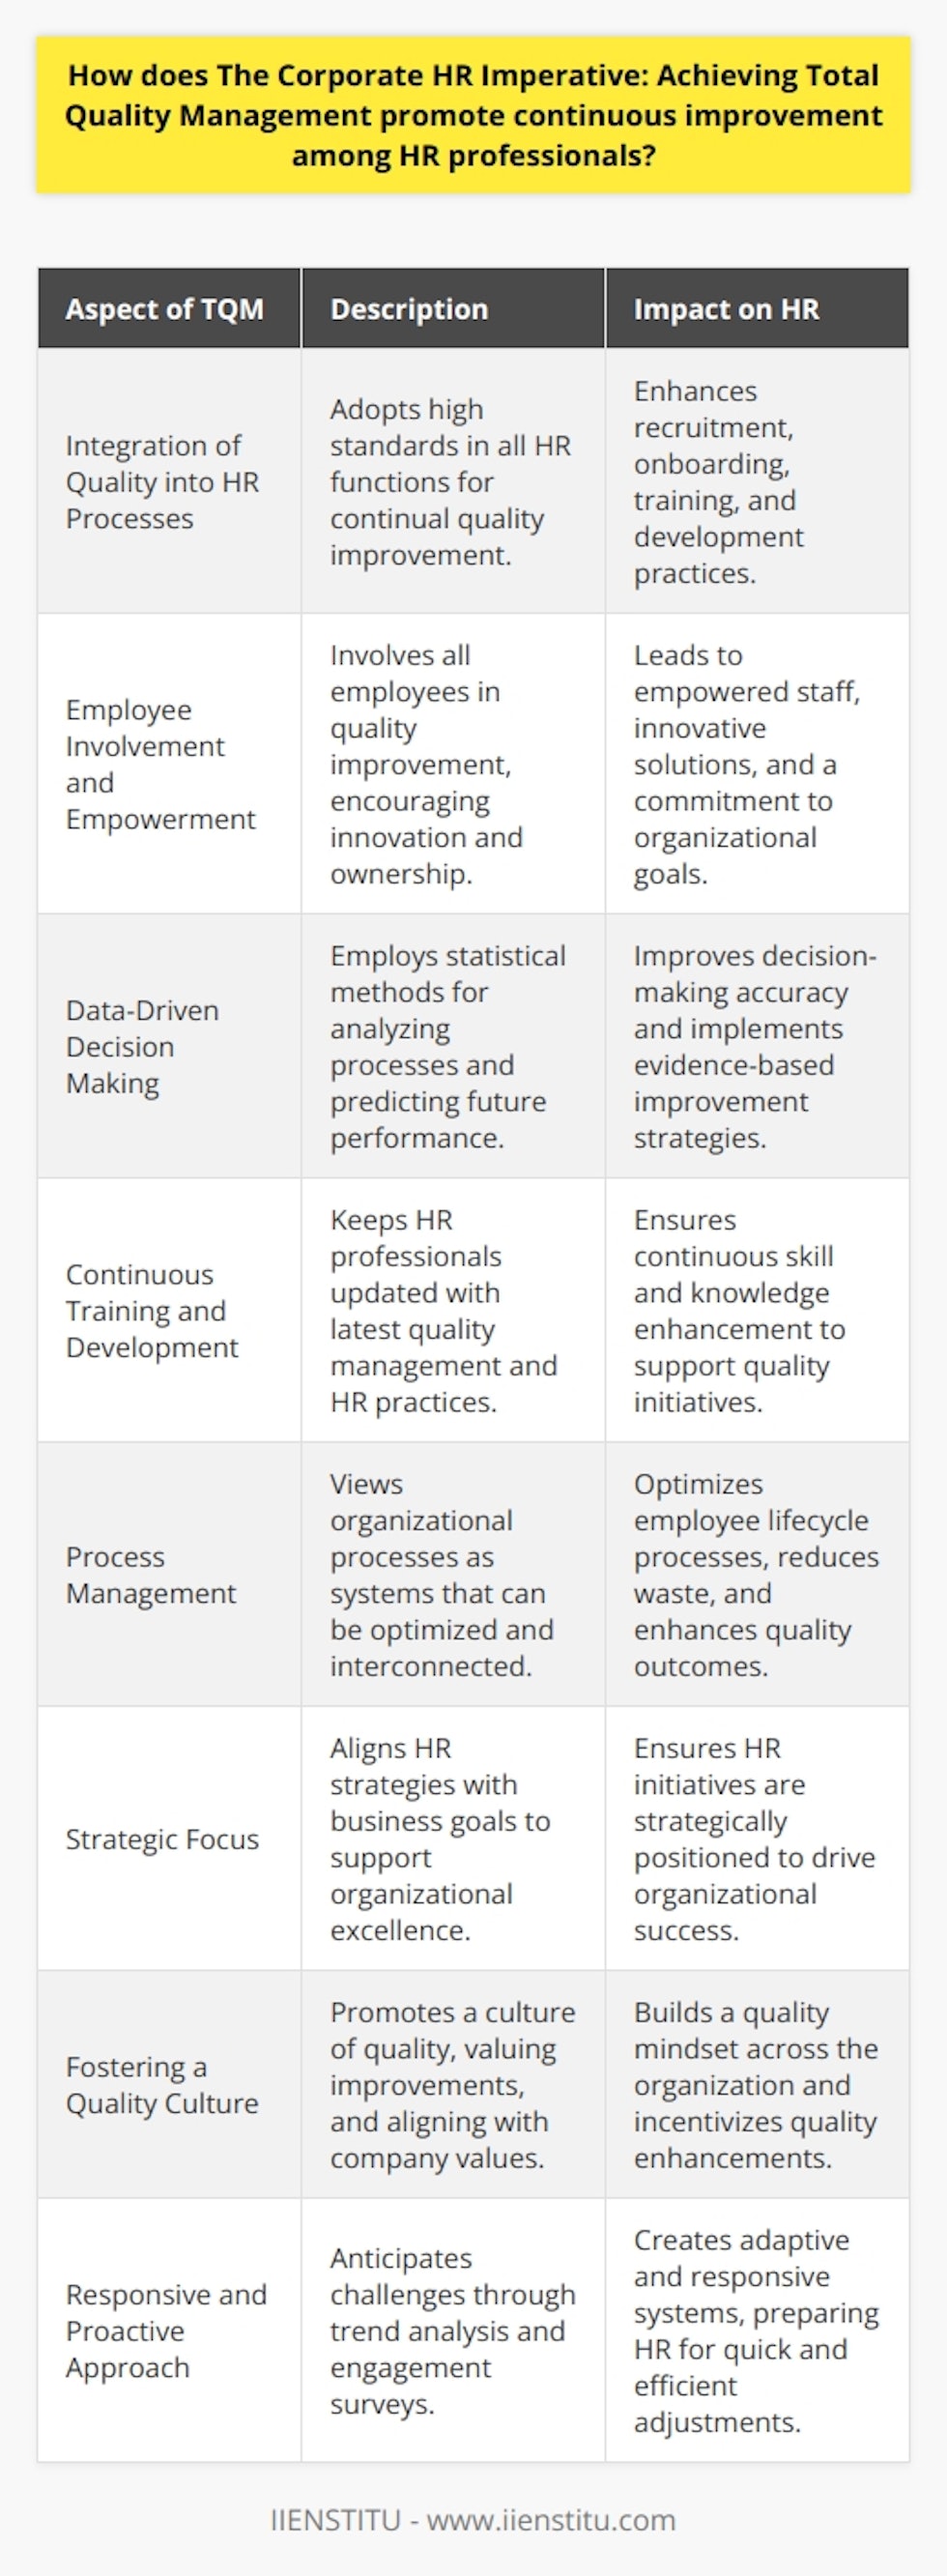 The Corporate HR Imperative: Achieving Total Quality Management (TQM) promotes continuous improvement among HR professionals by embedding a culture of excellence within the fabric of an organization's human resource practices. At the core of TQM is the principle that the quality of products and services is the responsibility of everyone involved in the creation and consumption of those products and services.For HR professionals, this means adopting a comprehensive approach that focuses on long-term success through customer satisfaction, and an ongoing pursuit of improved performance and efficiency. Here are some ways TQM can foster continuous improvement:1. **Integration of Quality into HR Processes**: HR professionals play a critical role in integrating quality into every aspect of the human resources function, from recruitment and onboarding to employee training and development. TQM encourages HR professionals to view these processes through the lens of quality improvement by setting high standards and continuously seeking to meet and exceed them.2. **Employee Involvement and Empowerment**: TQM principles stress the importance of involving all employees in the quality improvement process. HR professionals can create an environment where employees feel empowered to contribute ideas and take ownership of quality initiatives. This inclusive approach can lead to innovative solutions and a stronger commitment to the organization’s goals.3. **Data-Driven Decision Making**: HR professionals can use TQM’s emphasis on data and analytics to make informed decisions. By employing statistical methods to analyze processes and outcomes, HR can identify trends, predict future performance, and implement evidence-based strategies for improvement.4. **Continuous Training and Development**: The dynamic nature of TQM requires HR professionals to stay current with the latest in quality management and HR practices. By fostering a culture of continuous learning and professional development, HR can ensure that team members have the necessary skills and knowledge to contribute effectively to quality initiatives.5. **Process Management**: TQM encourages HR professionals to view organizational processes as interrelated systems that can be optimized. By mapping out the entire process of employee interaction with the company, from hiring to exit, HR can identify bottlenecks, eliminate waste, and ensure a seamless flow that supports quality outcomes.6. **Strategic Focus**: In a TQM-driven organization, HR professionals align HR strategies with business goals. By taking a strategic approach to quality management, HR ensures that human resource initiatives support the wider organizational quest for excellence.7. **Fostering a Quality Culture**: HR can lead by example in promoting a culture of quality. Rewarding teams and individuals for quality improvement initiatives, openly discussing the importance of quality in meeting organizational goals, and aligning company values with a commitment to excellence can cement a quality mindset across the organization.8. **Responsive and Proactive Approach**: HR professionals can use TQM to adopt a proactive approach to potential challenges by anticipating them through trend analysis and engagement surveys. This allows HR to create dynamic and responsive systems that can adapt to changes quickly and efficiently.By focusing on the holistic application of TQM principles, HR professionals institute a cycle of continuous improvement that supports organizational agility and excellence. TQM requires a commitment to quality at every level and, when implemented effectively, can transform HR processes and outcomes, leading to an overall competitive advantage for the organization. Whether through enhancing employee satisfaction, optimizing internal processes, or utilizing metrics for strategic planning, HR becomes not just an administrative function but a pivotal driver of organizational success.